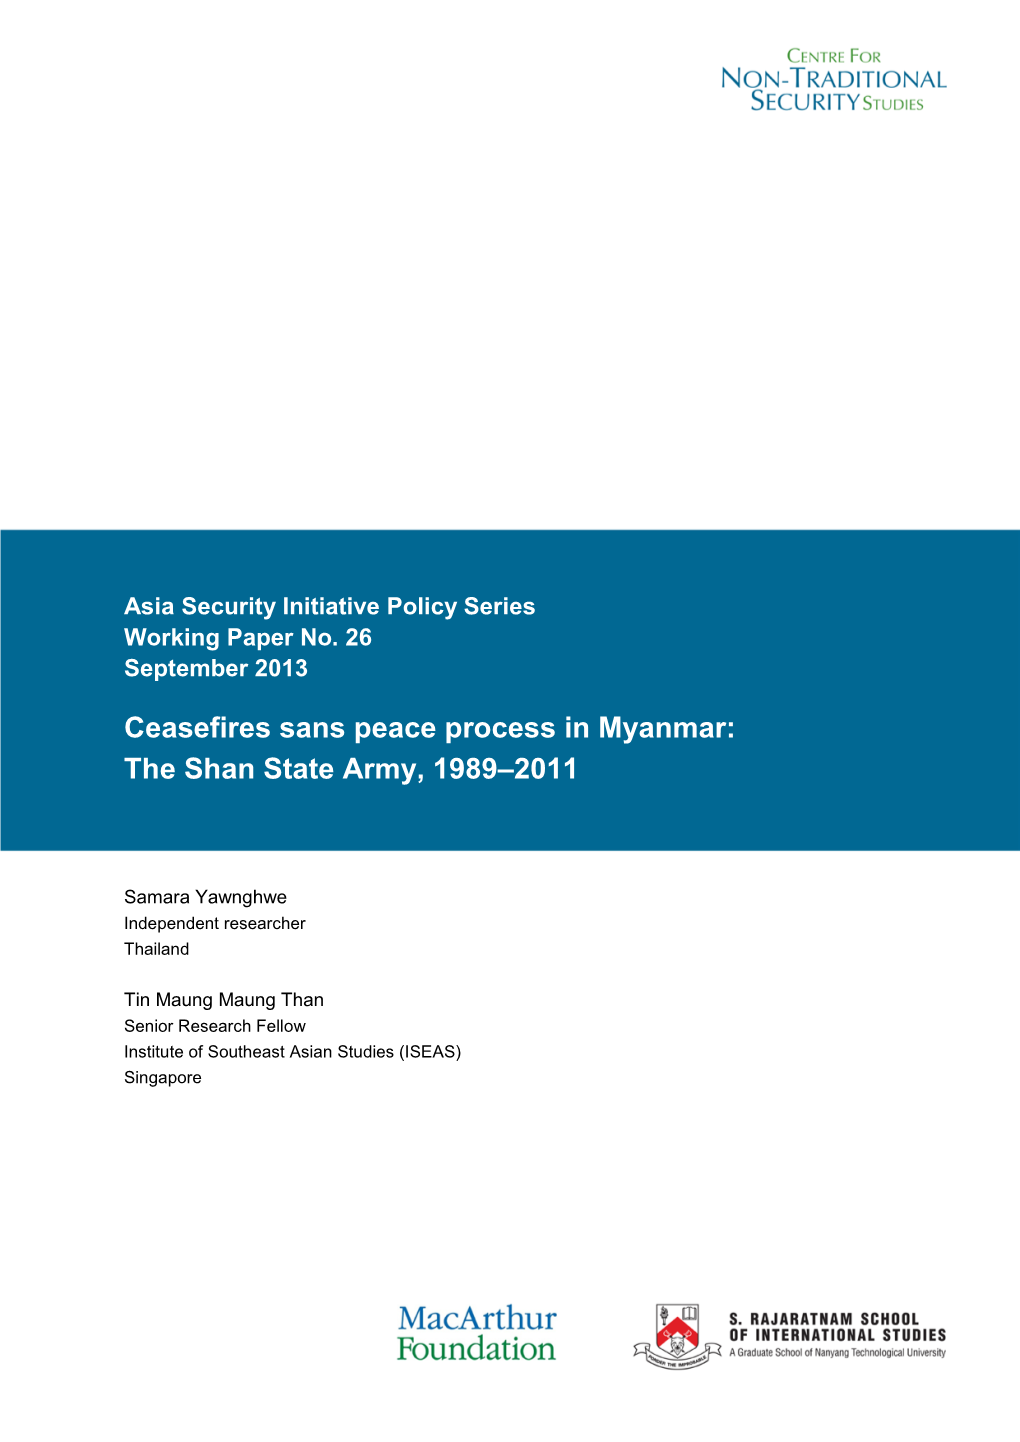 Ceasefires Sans Peace Process in Myanmar: the Shan State Army, 1989–2011